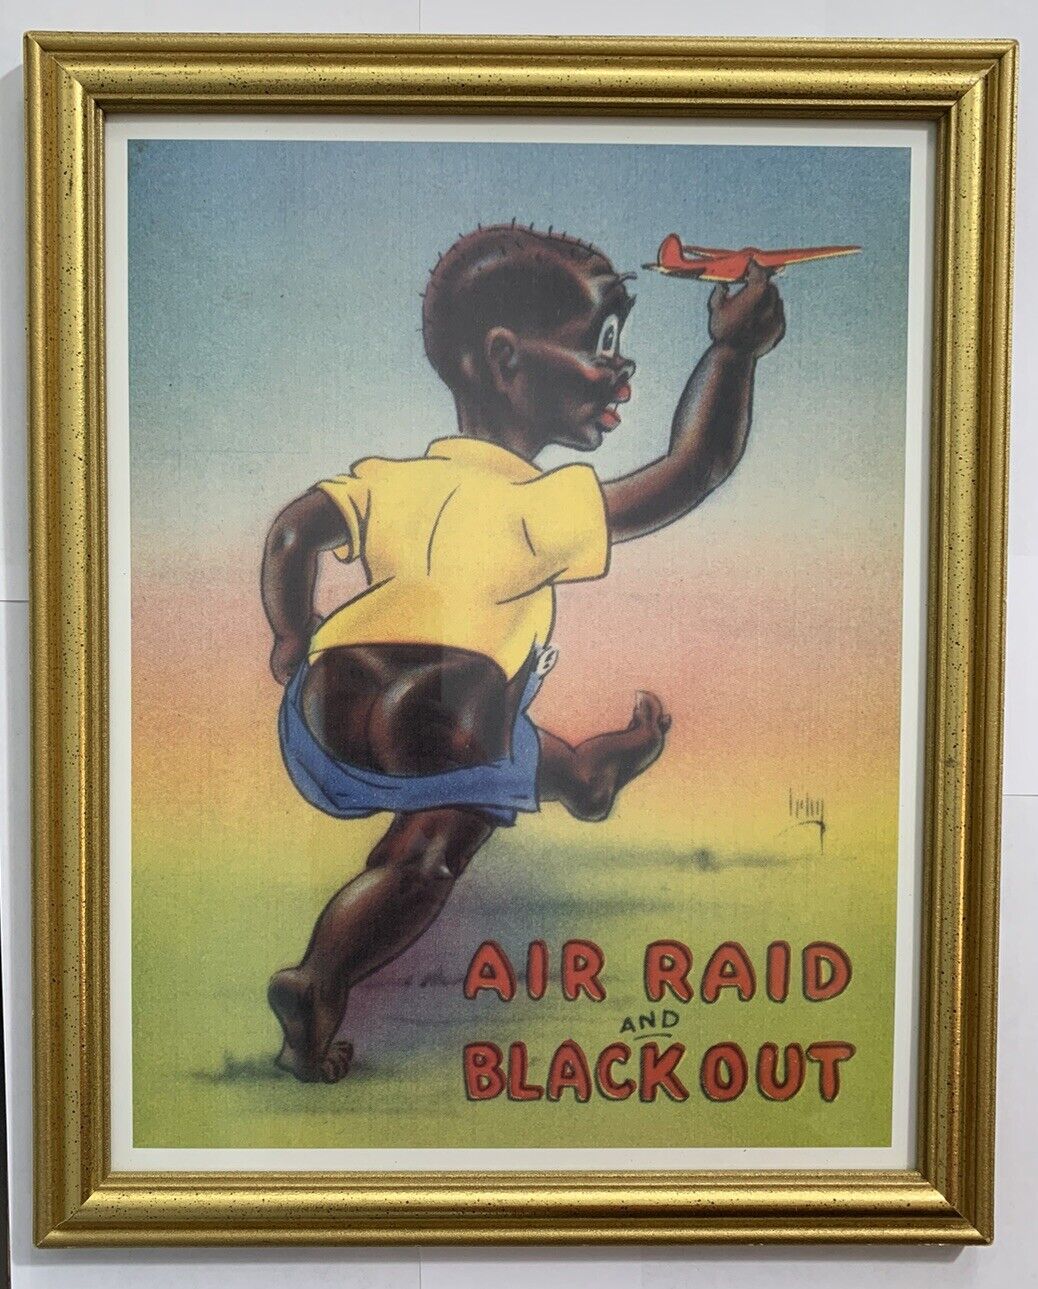 1940’s Air Raid and Blackout Framed Print. 15 by 12 Inches. Vintage